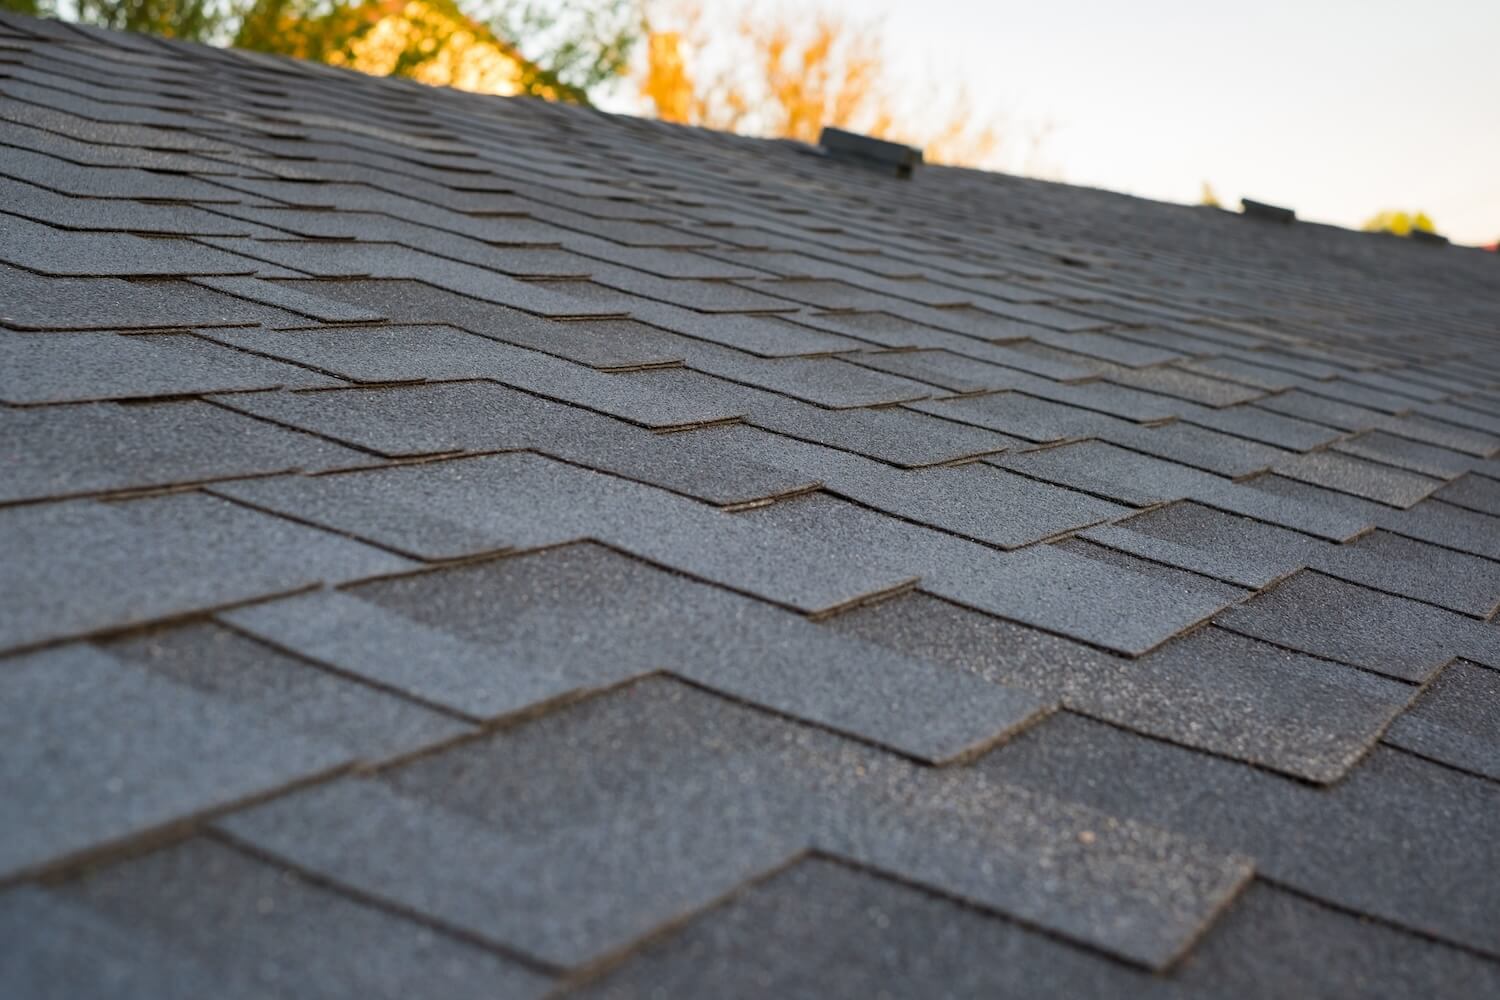 How To File An Insurance Claim For Roof Repairs The Easy Way